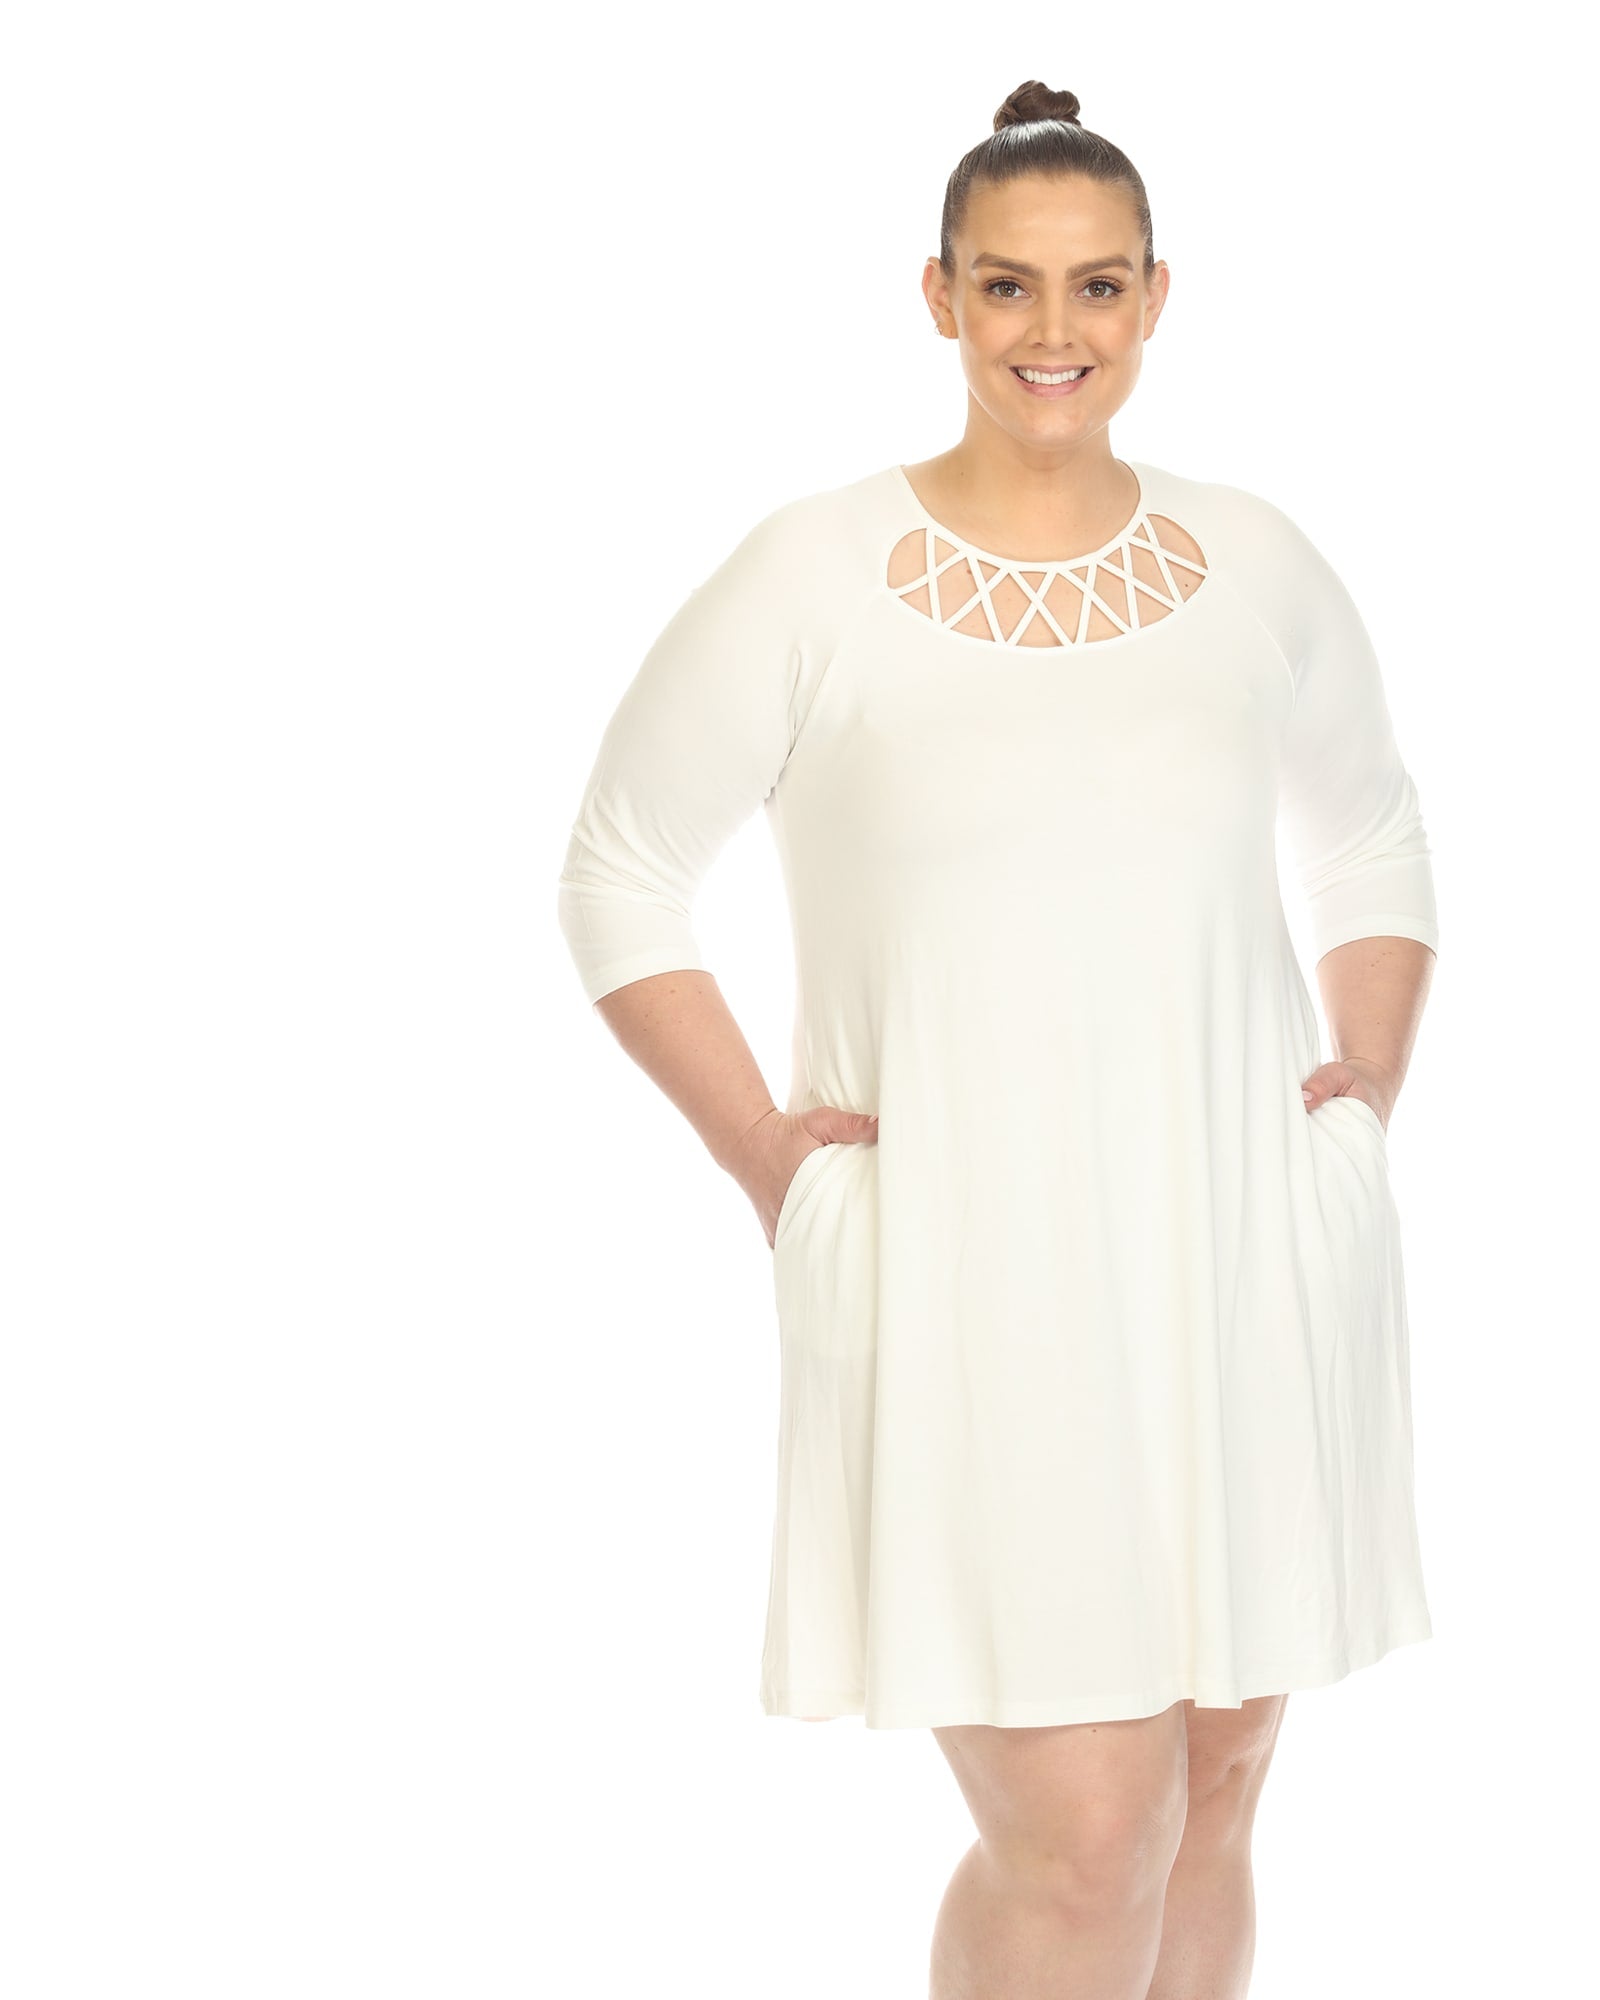 Fashion to Figure Plus Size Crystal Crossneck Midi Dress in White